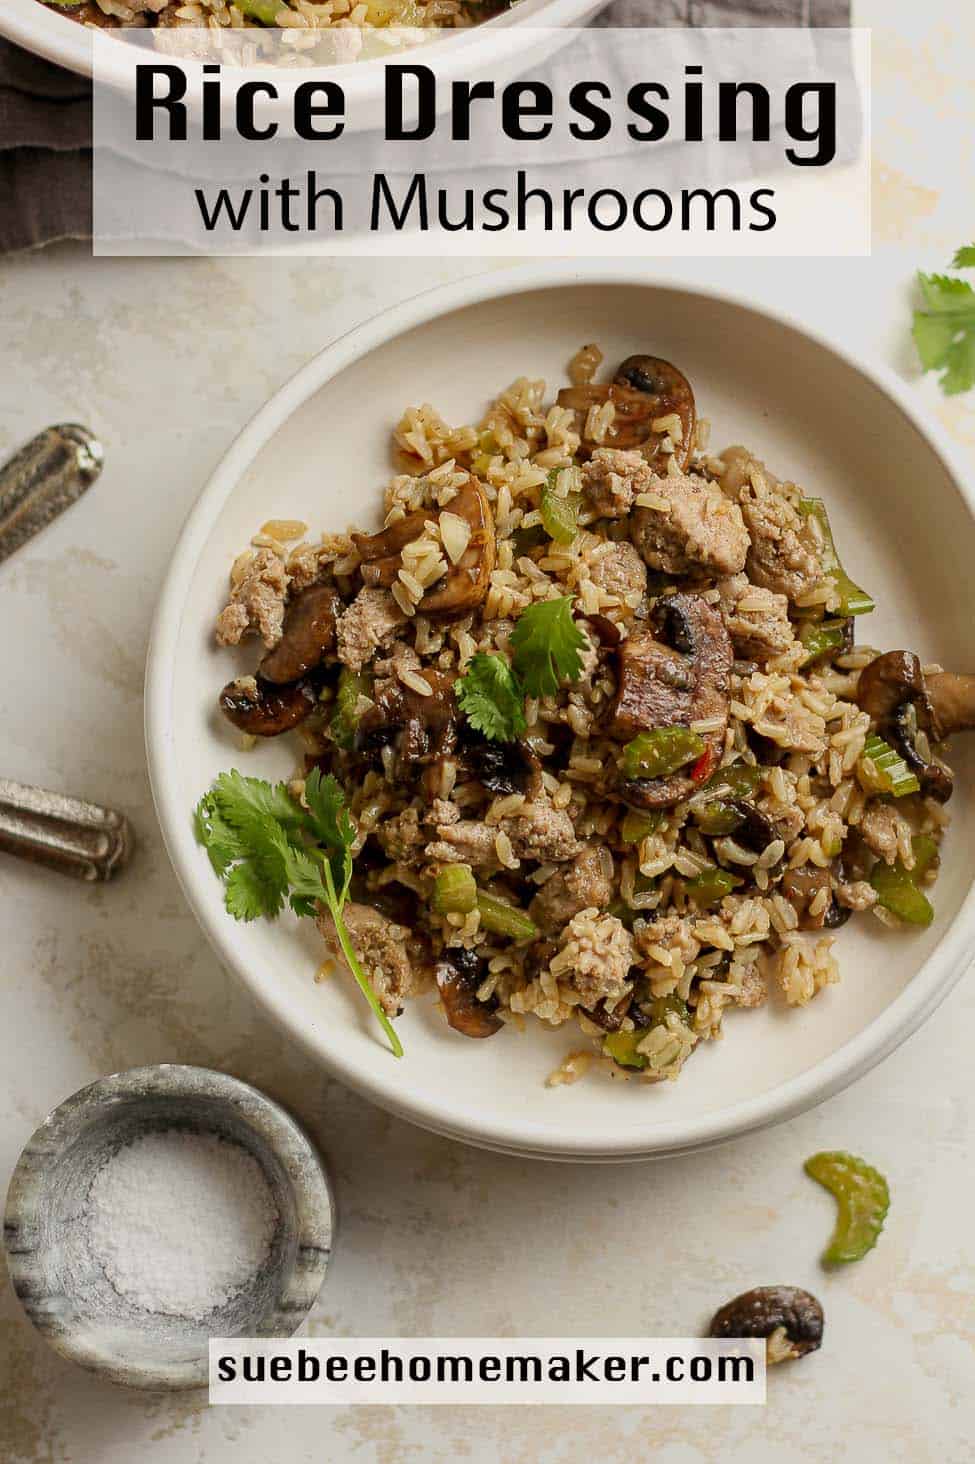 A bowl of rice dressing with mushrooms.